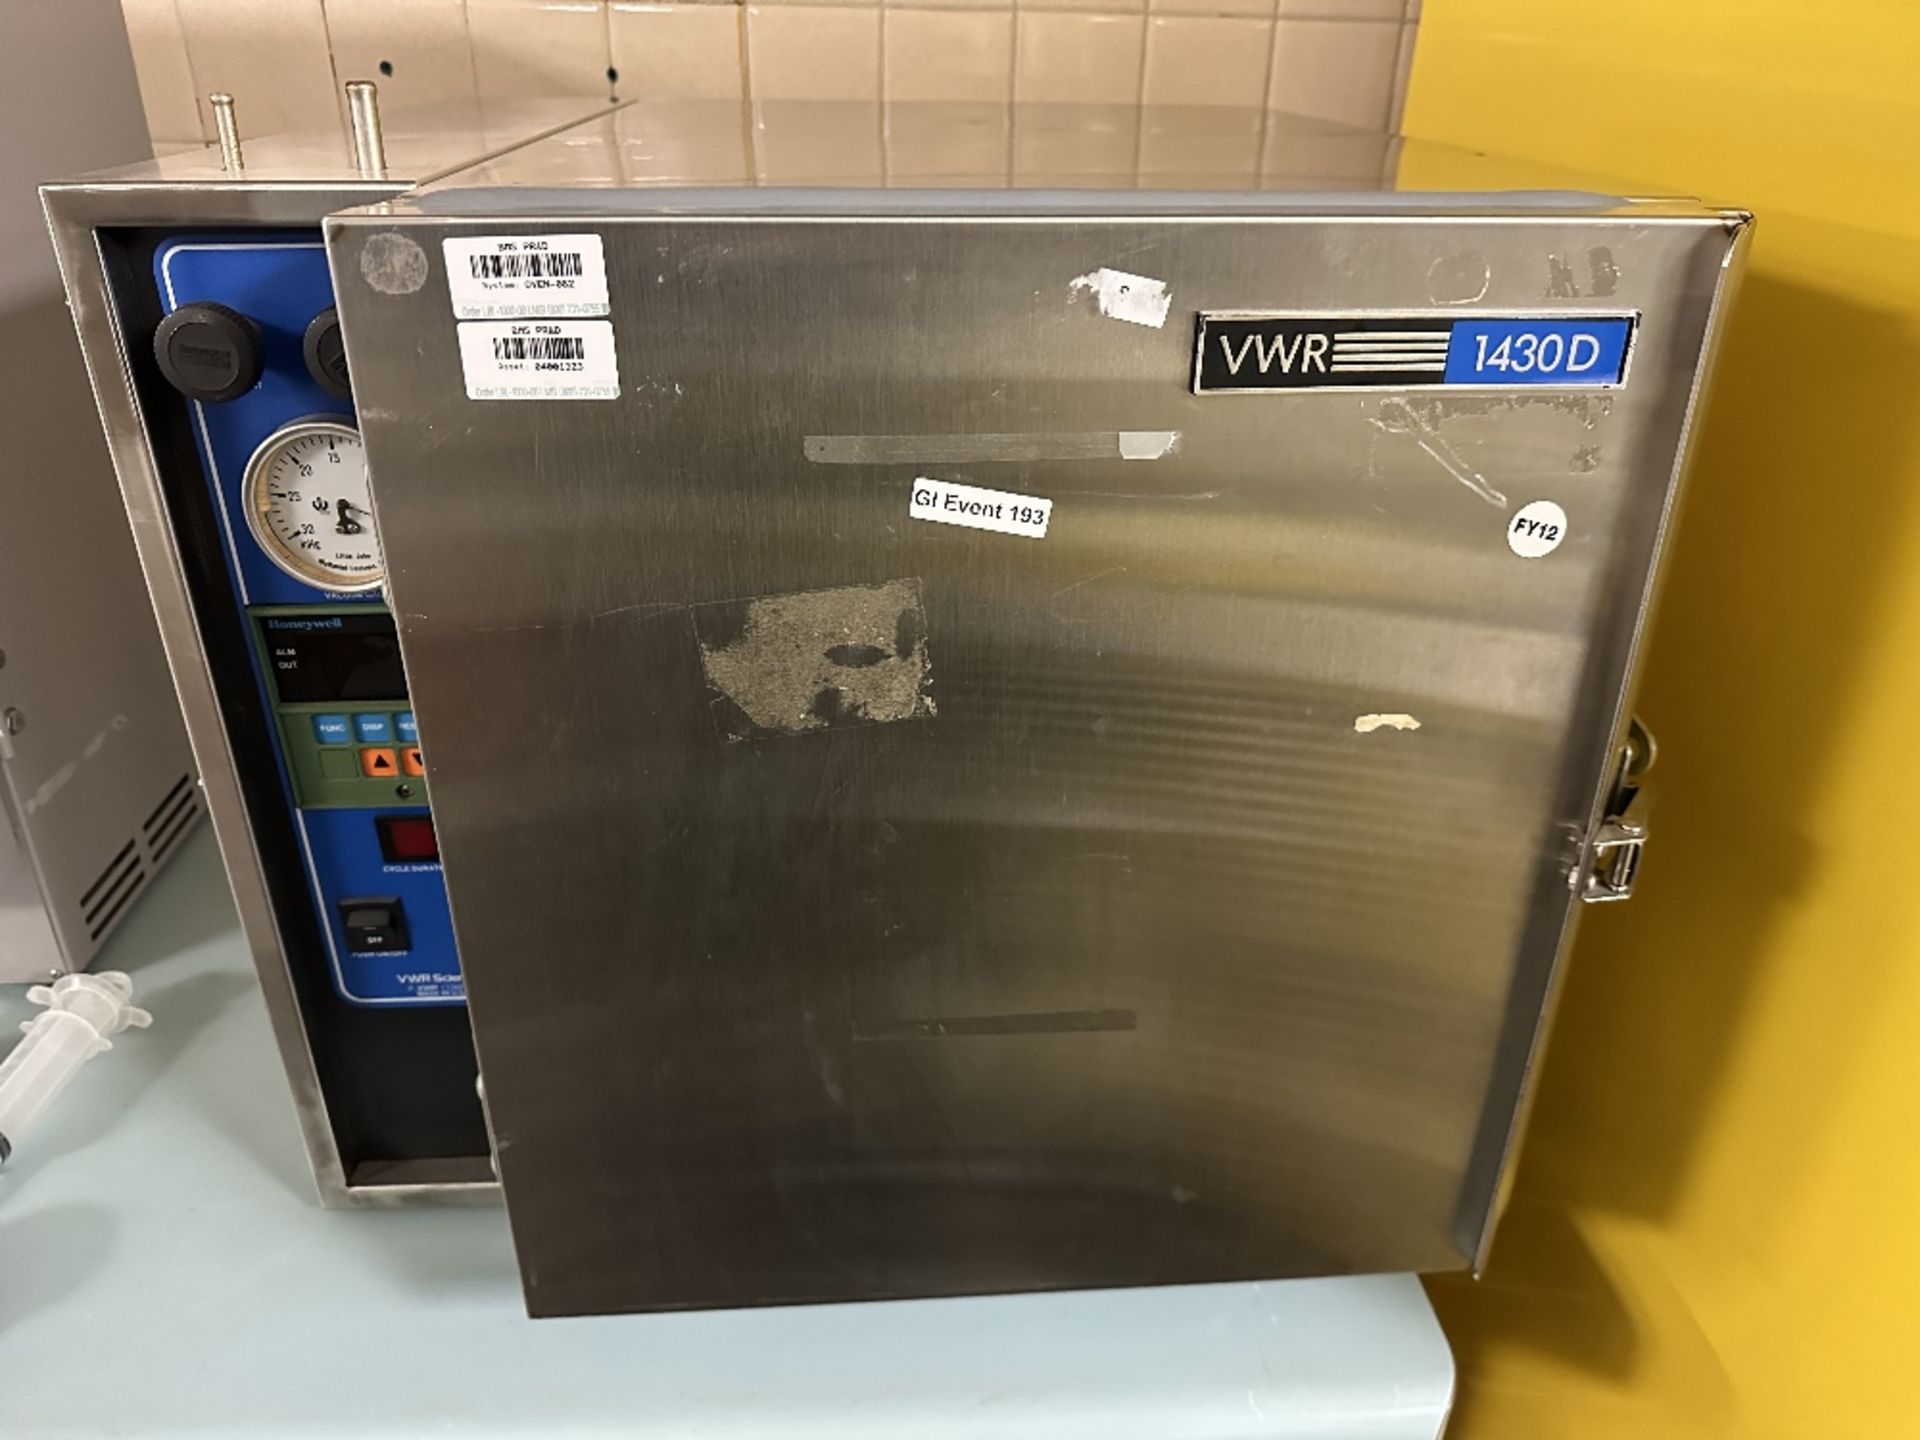 VWR 1430d Vacuum Oven (LOCATED IN MIDDLETOWN, N.Y.)-FOR PACKAGING & SHIPPING QUOTE, PLEASE CONTACT